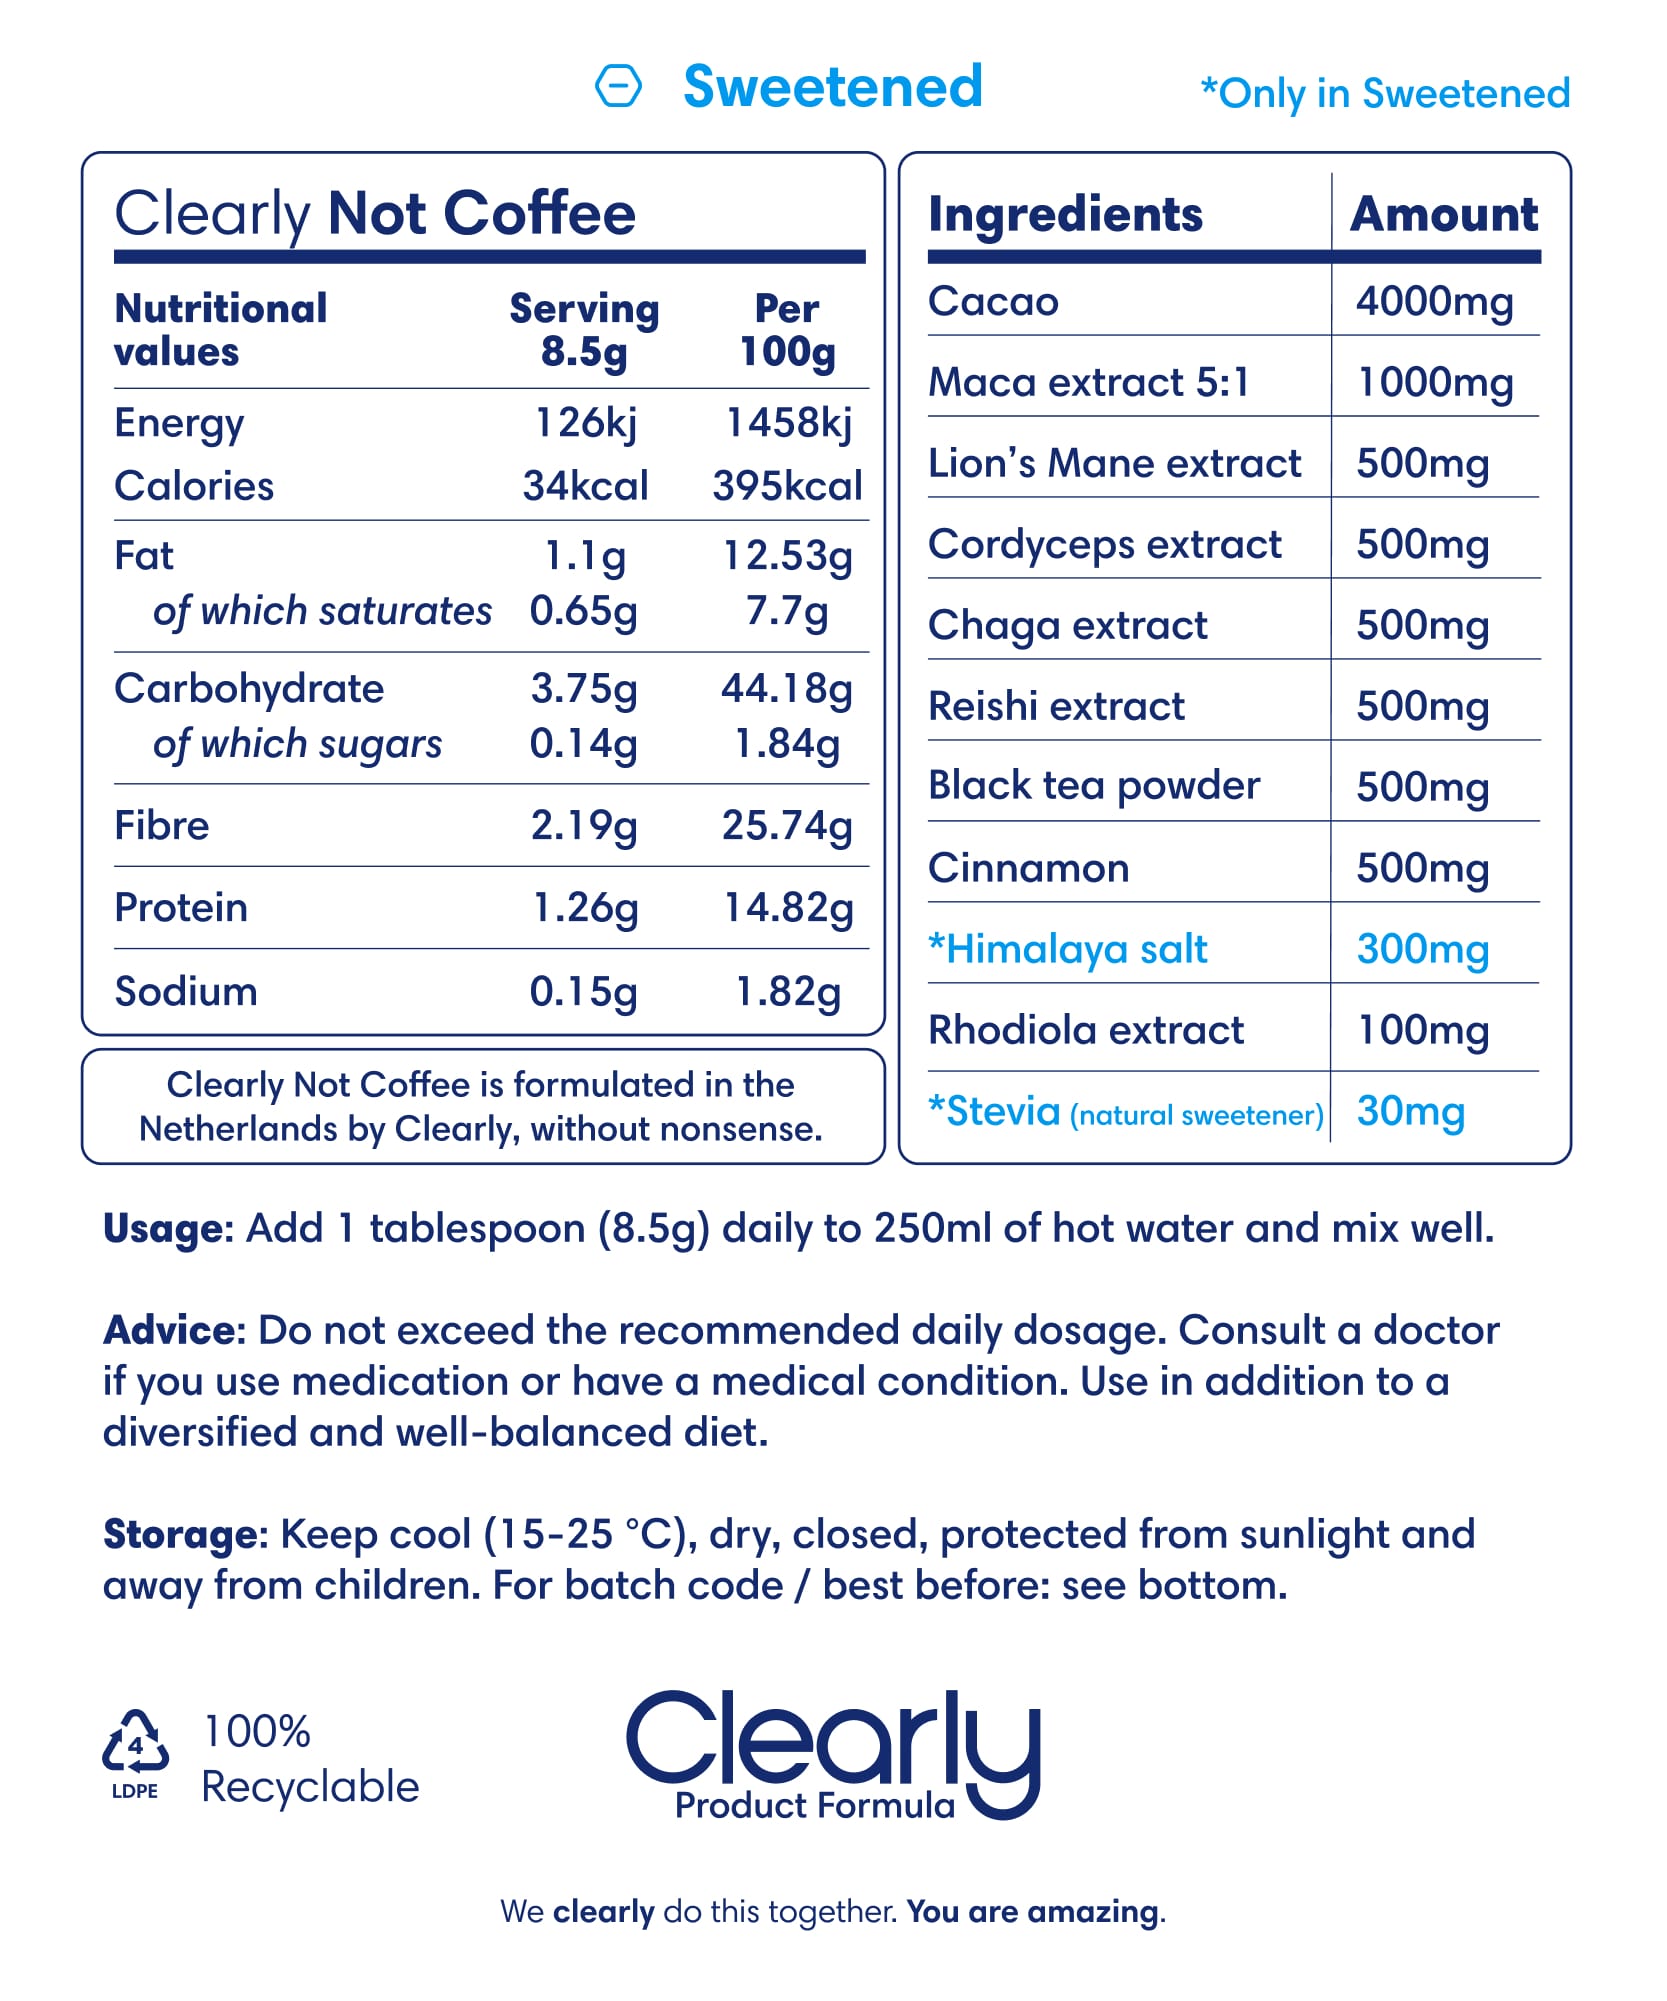 Clearly Not Coffee